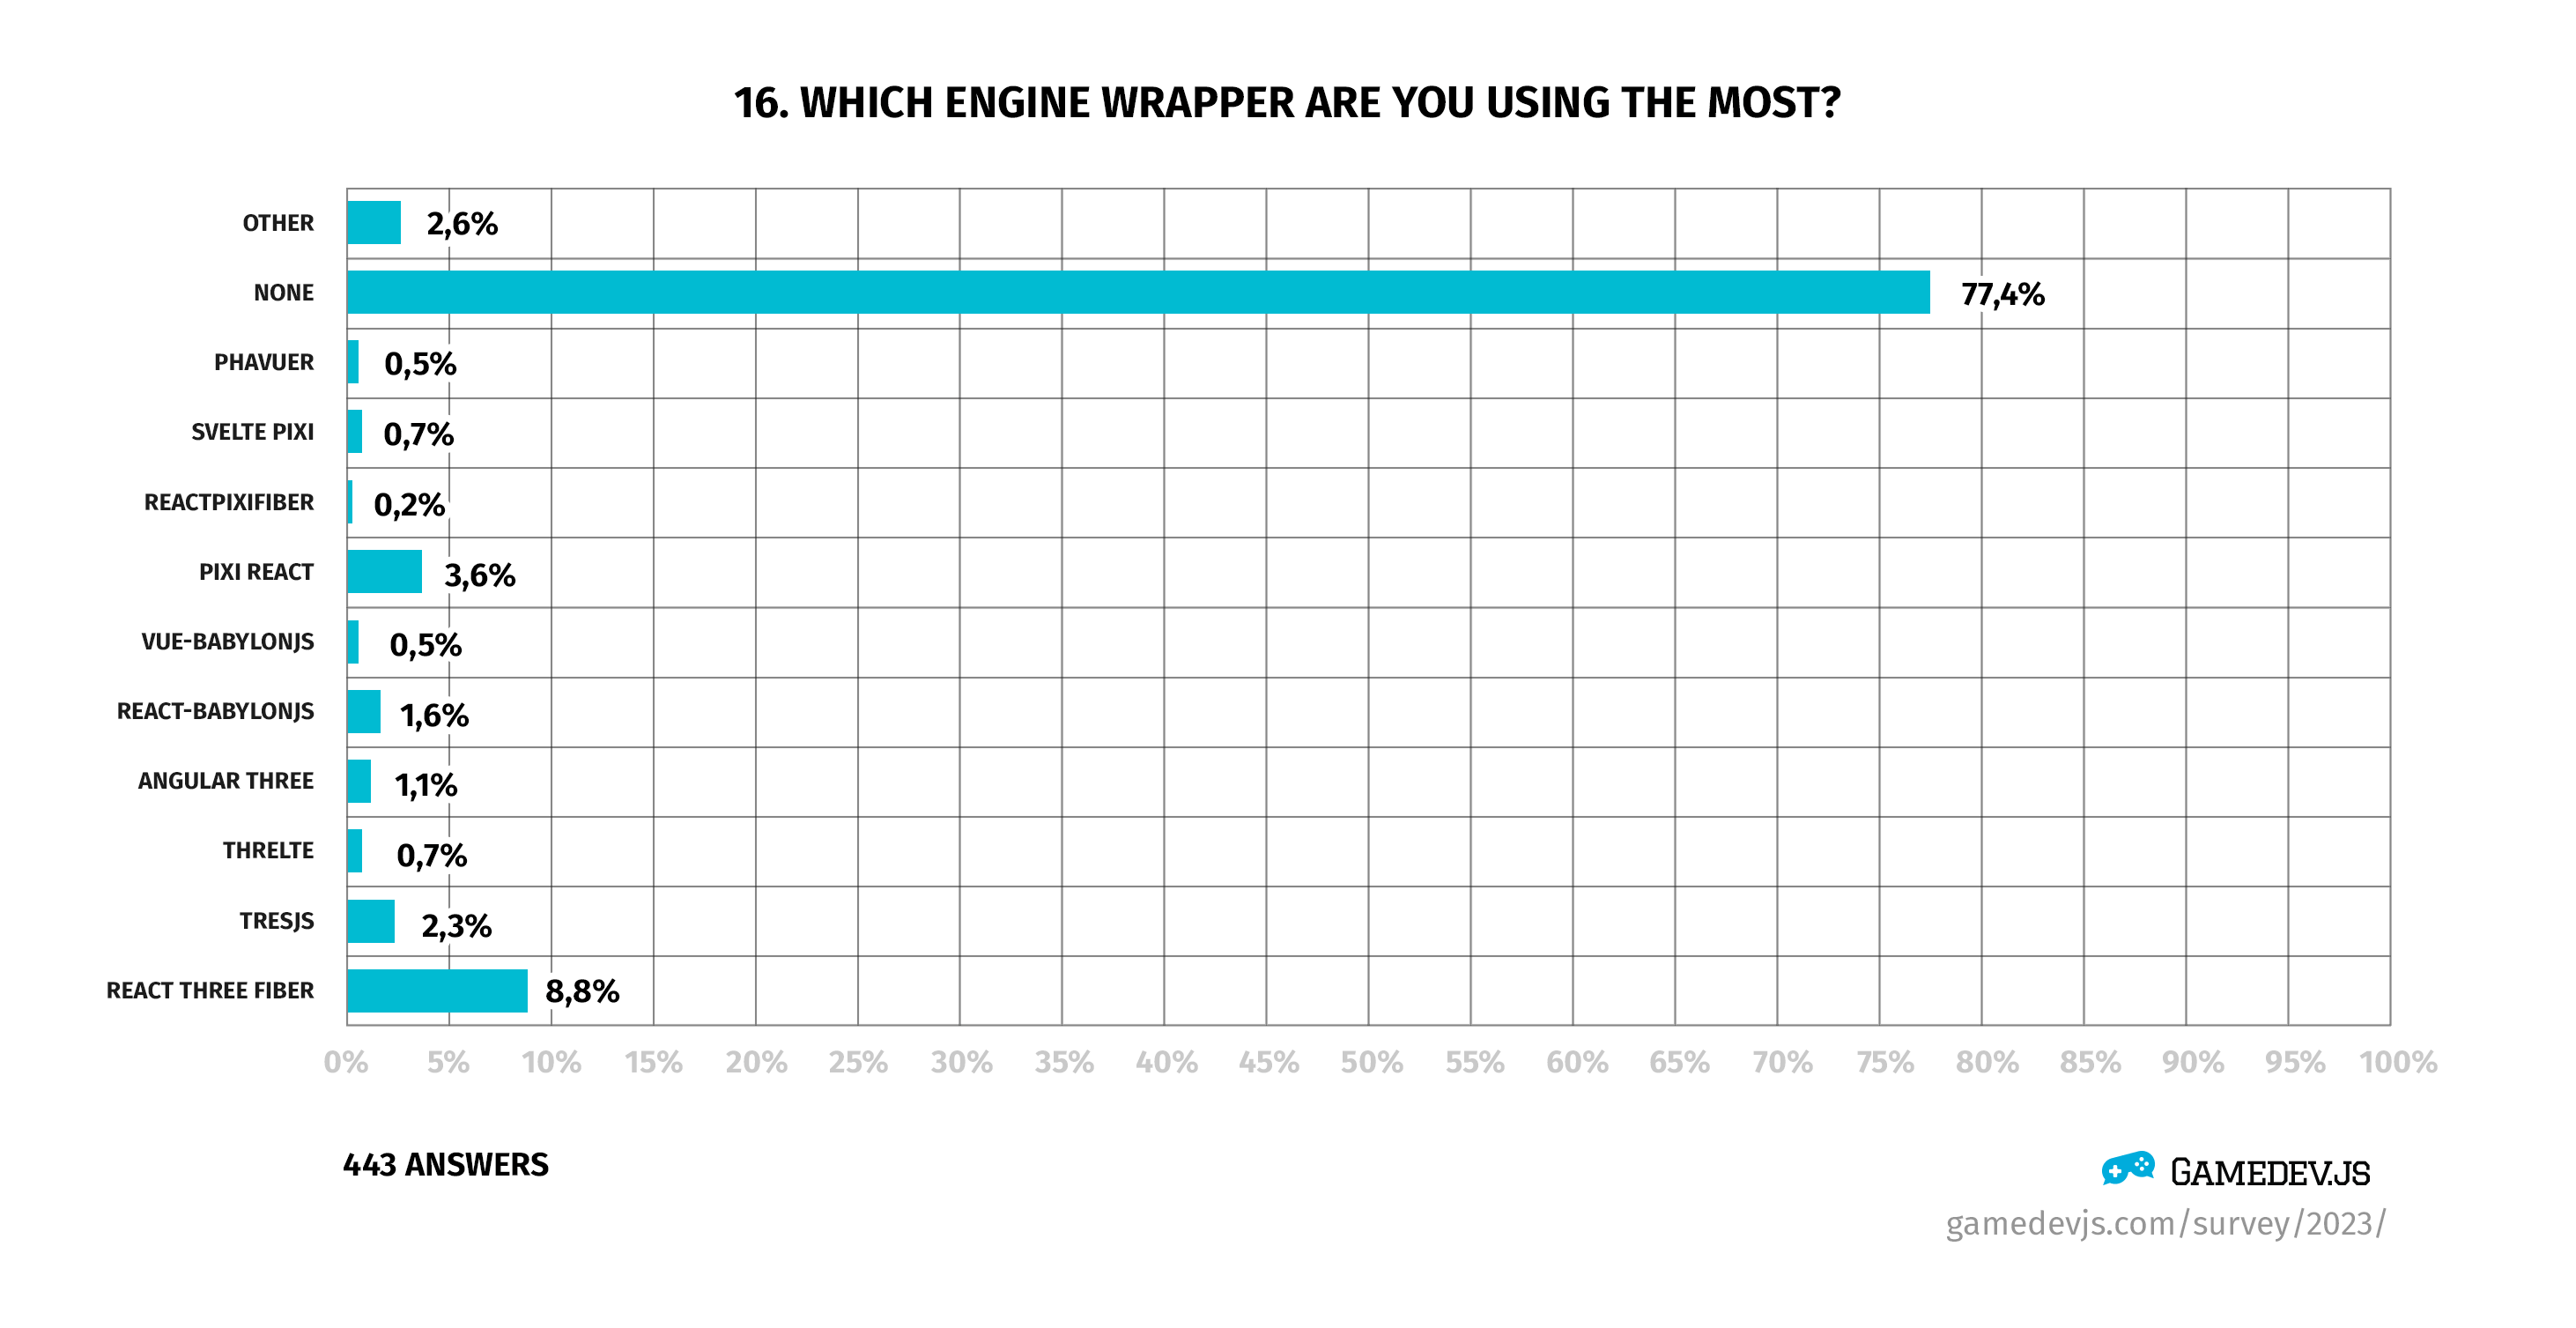 Gamedev.js Survey 2023 - Question #16: Which engine wrapper are you using the most?